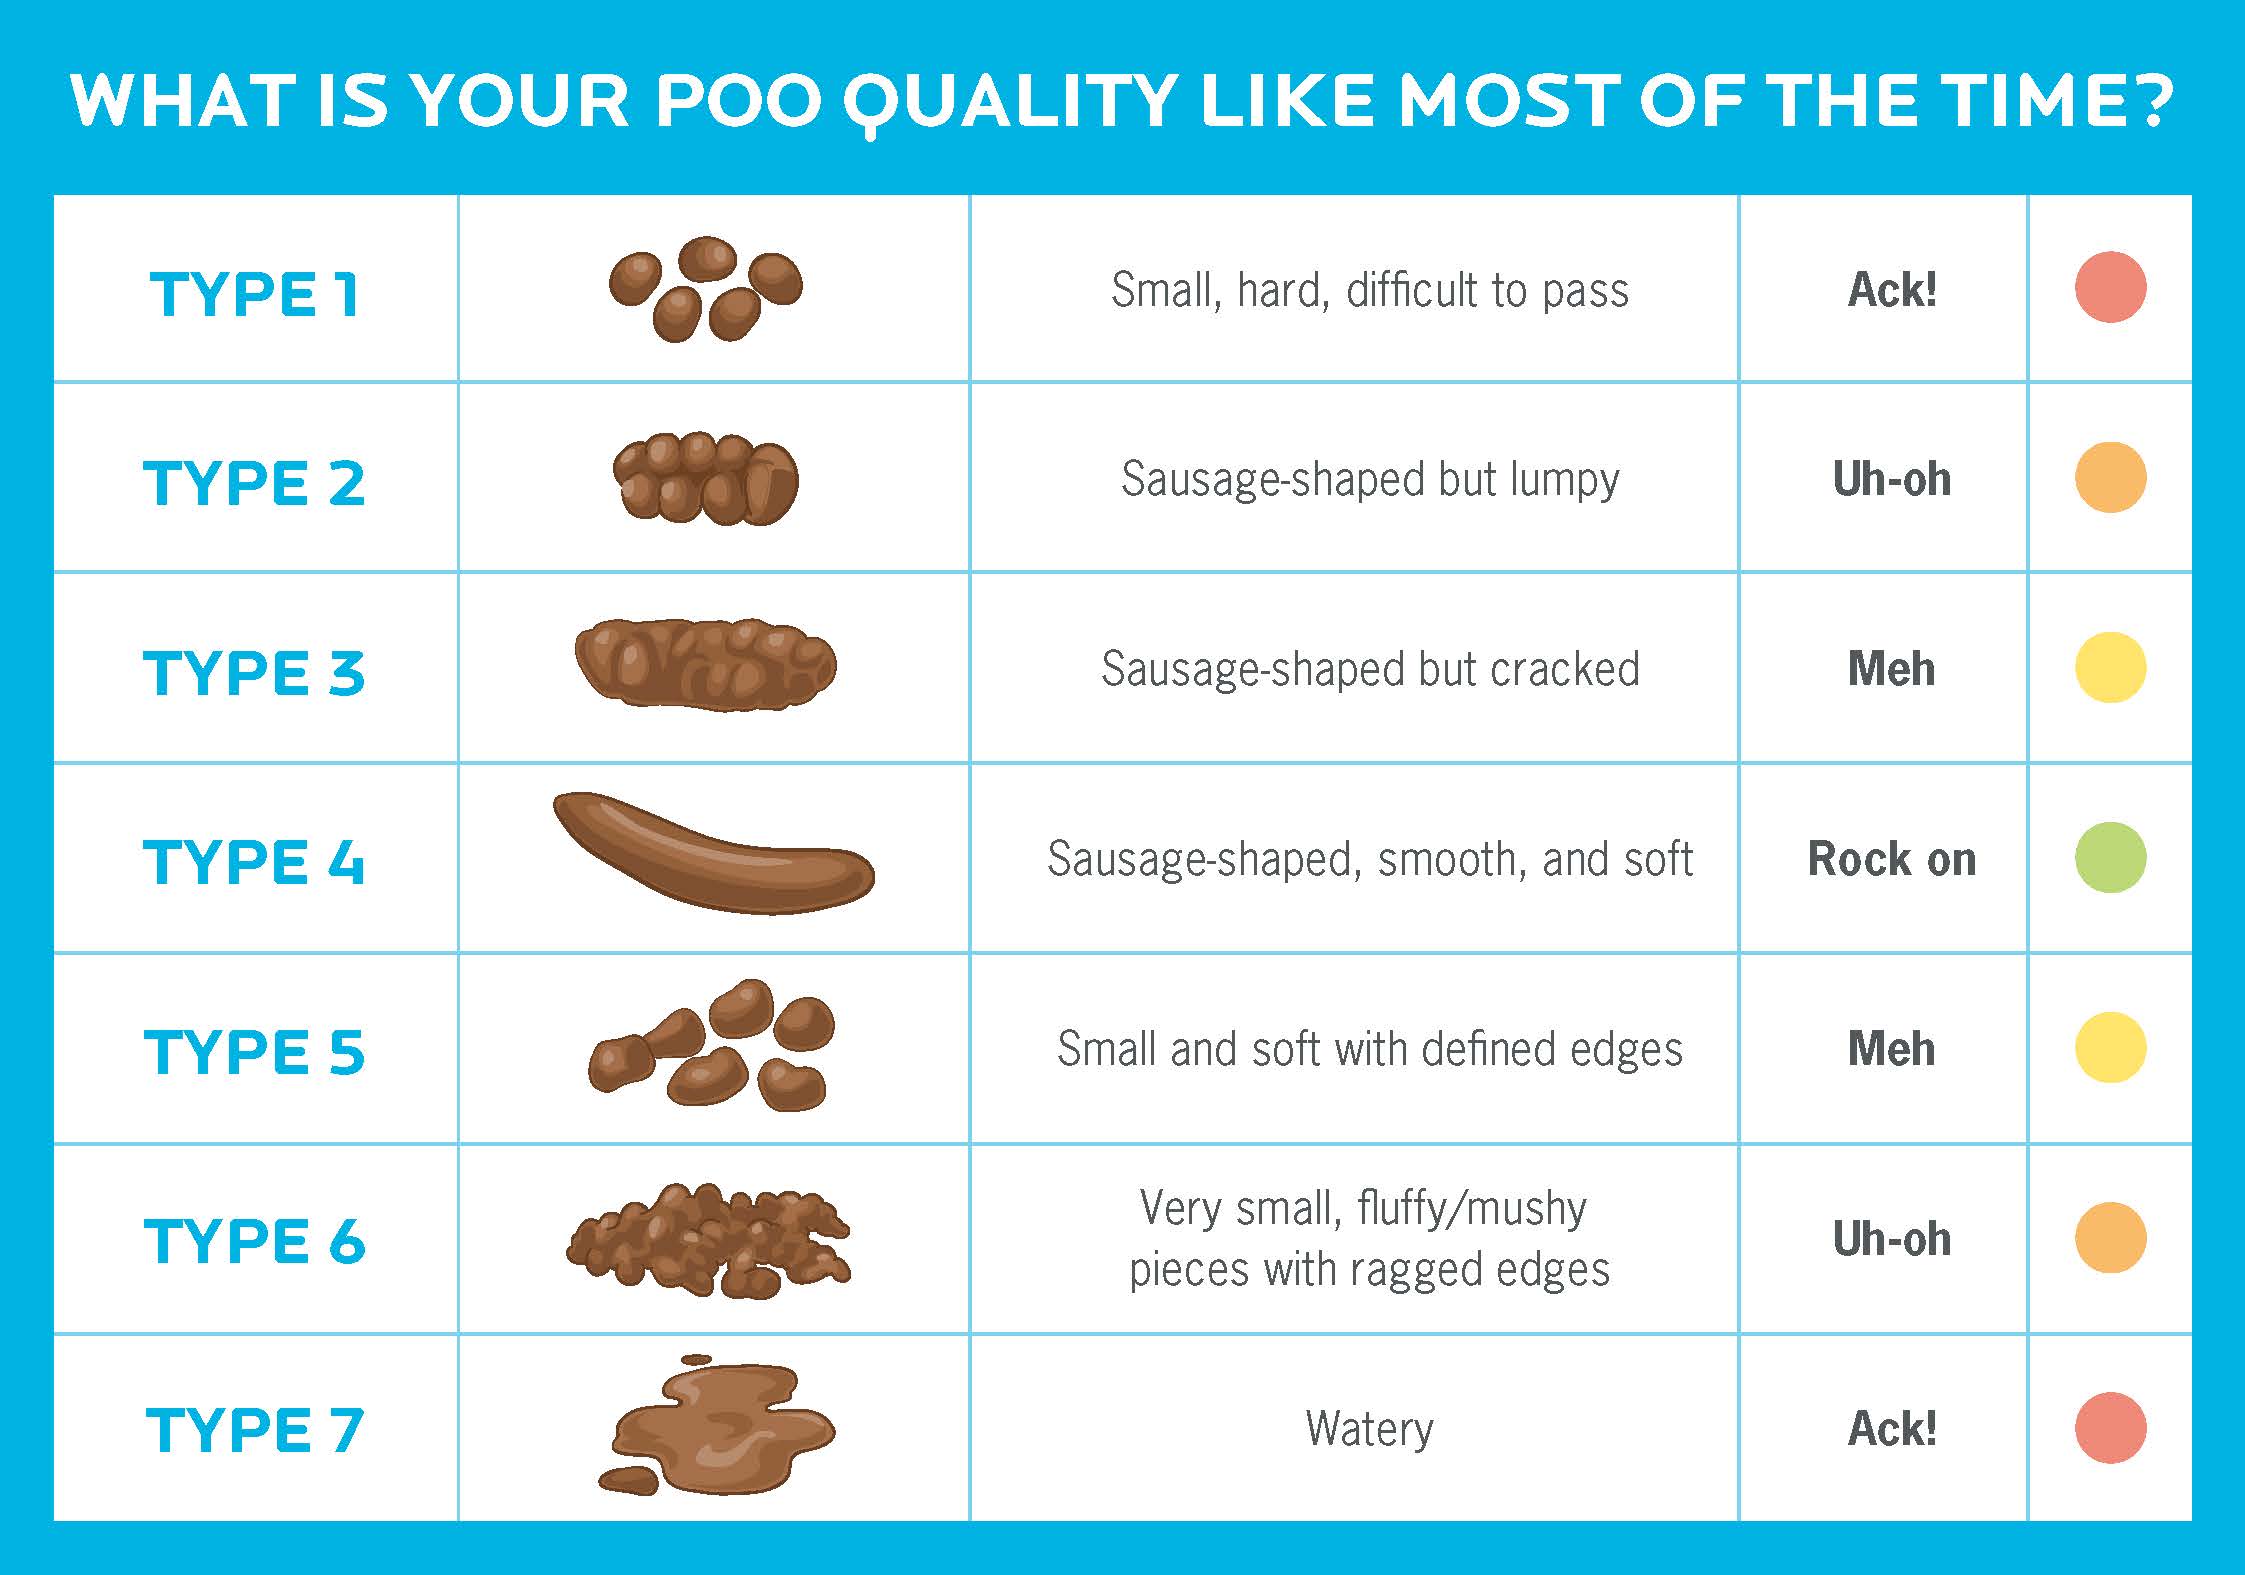 What is your poo quality like most of the time?